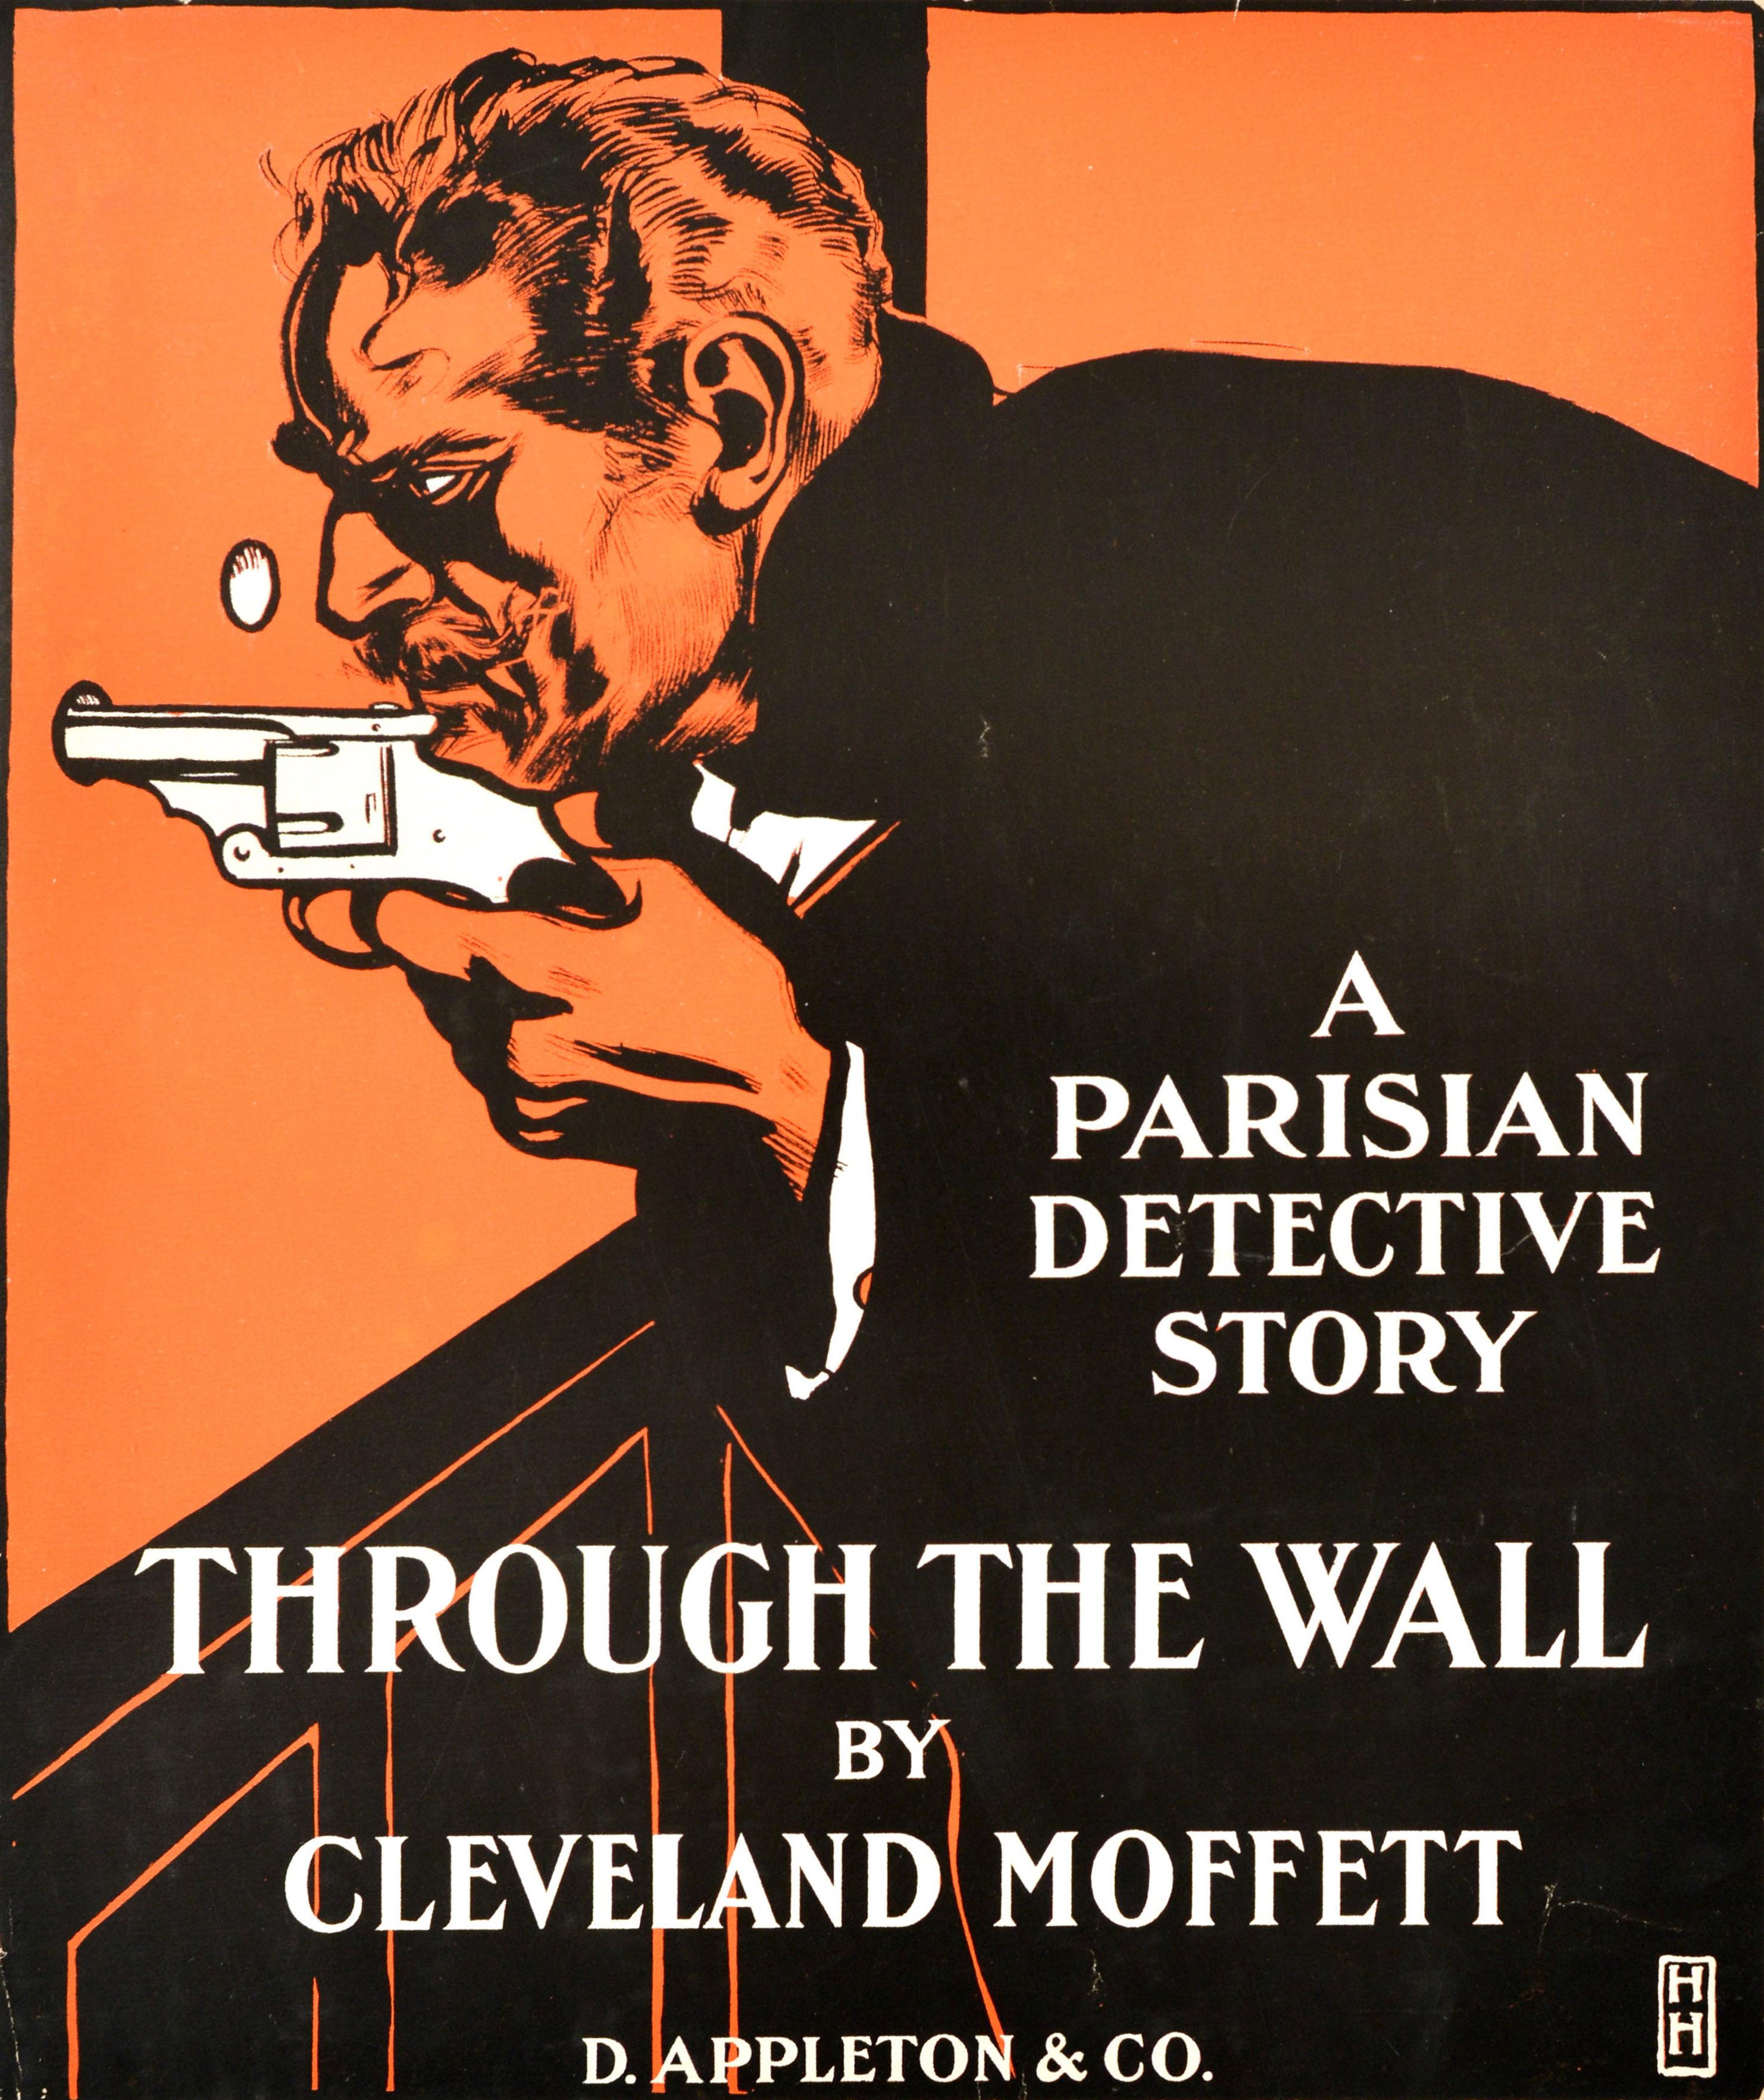 Unknown Print - Original Antique Book Advertising Poster Through The Wall Cleveland Moffett